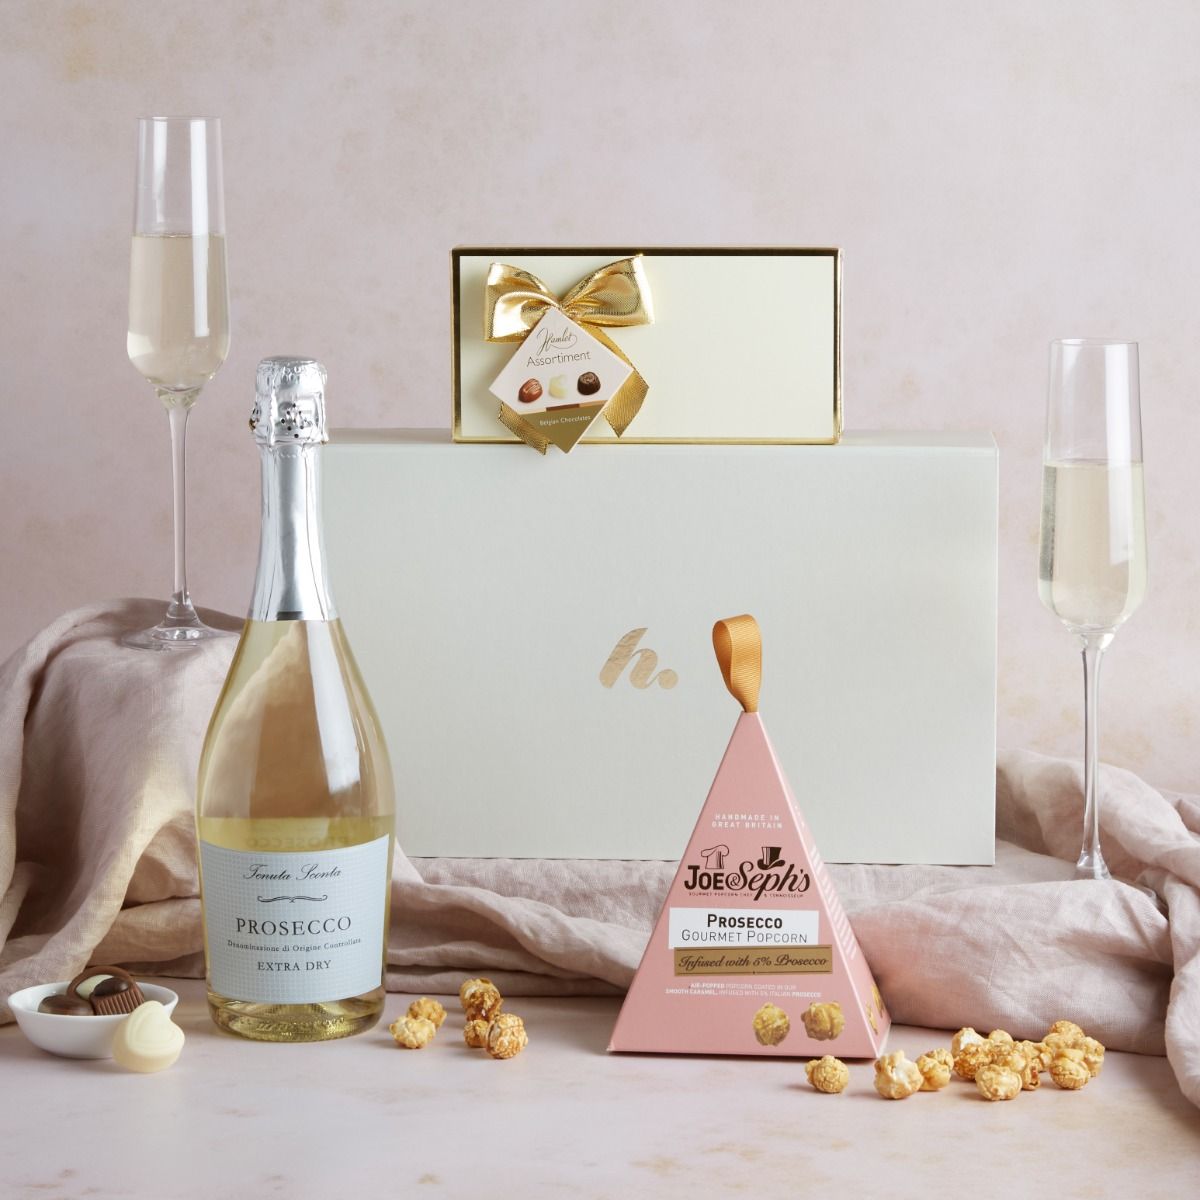 The prosecco & treats hamper with contents on display and the signature cream gift box